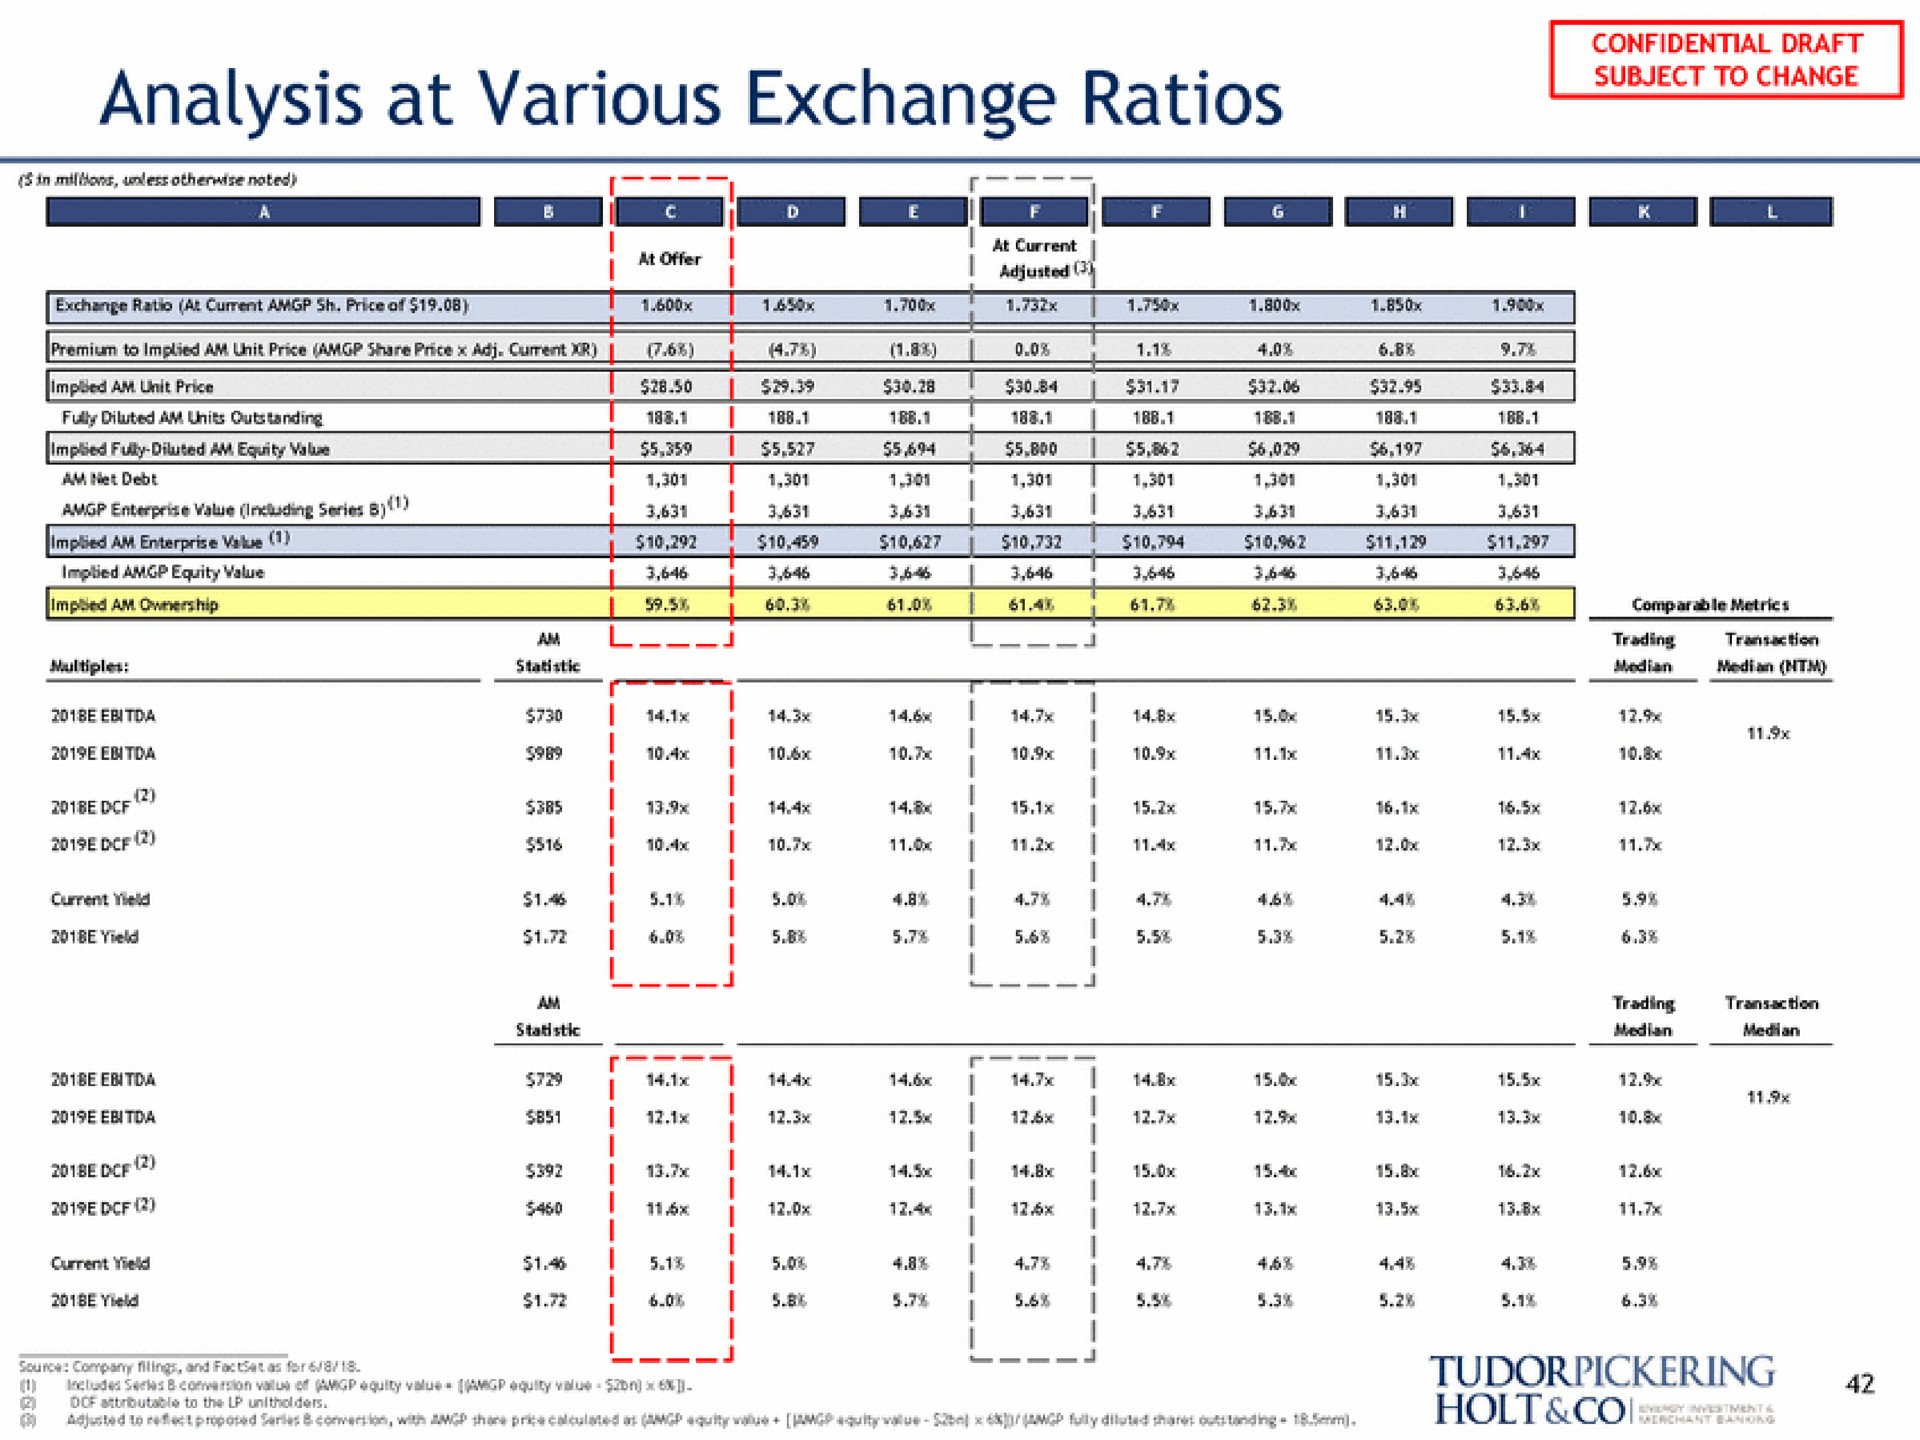 analysis at various exchange ratios | Tudor, Pickering, Holt & Co